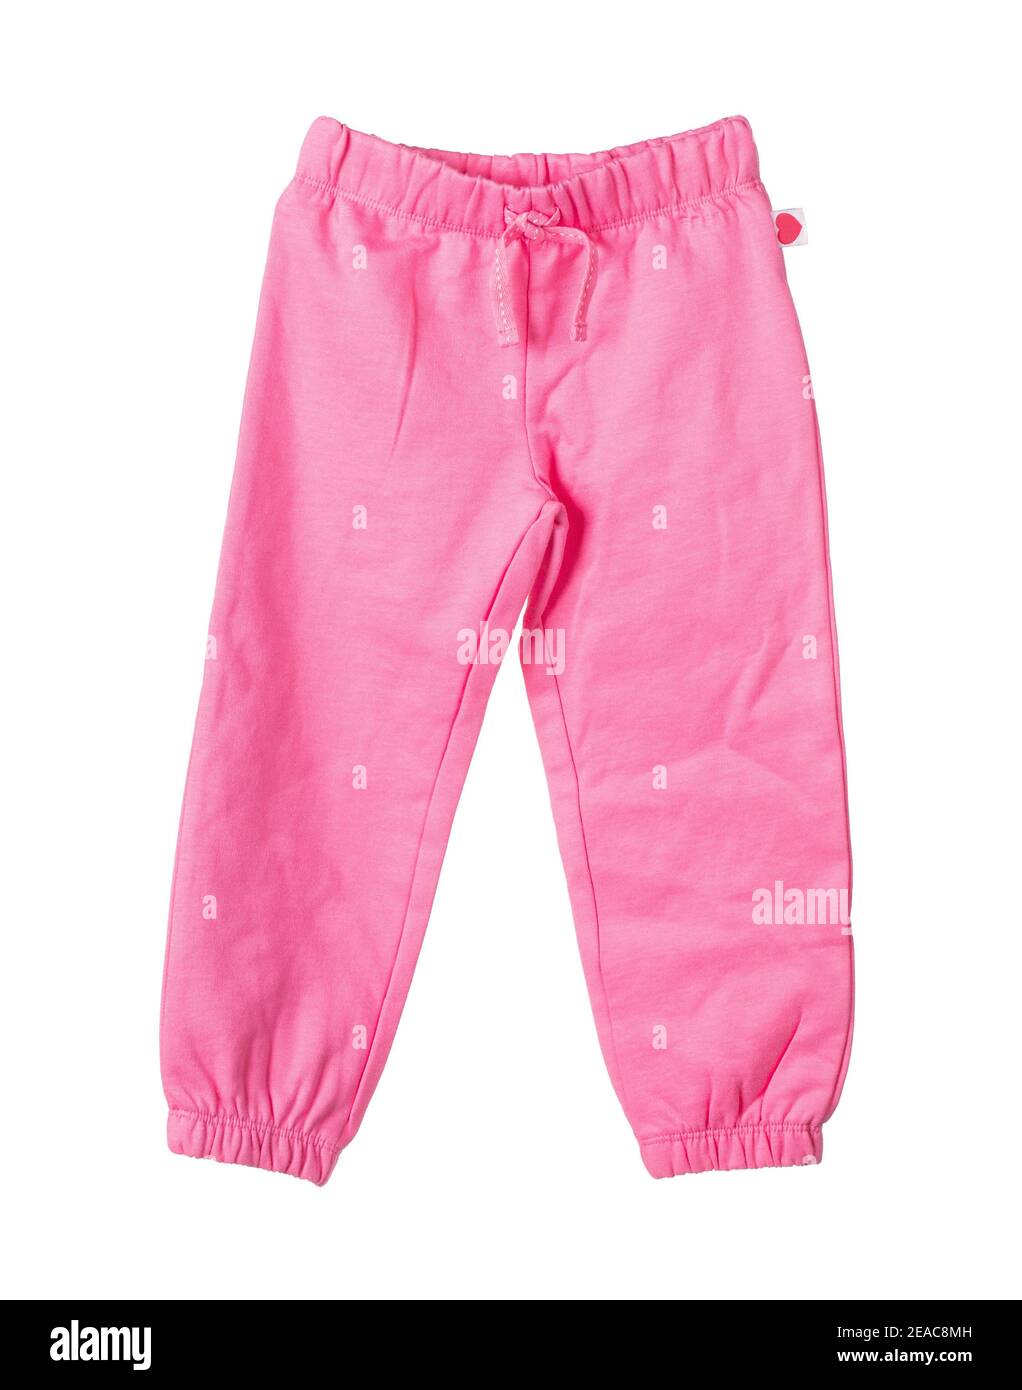 Childrens kntted trousers. Isolated on the white background. Stock Photo